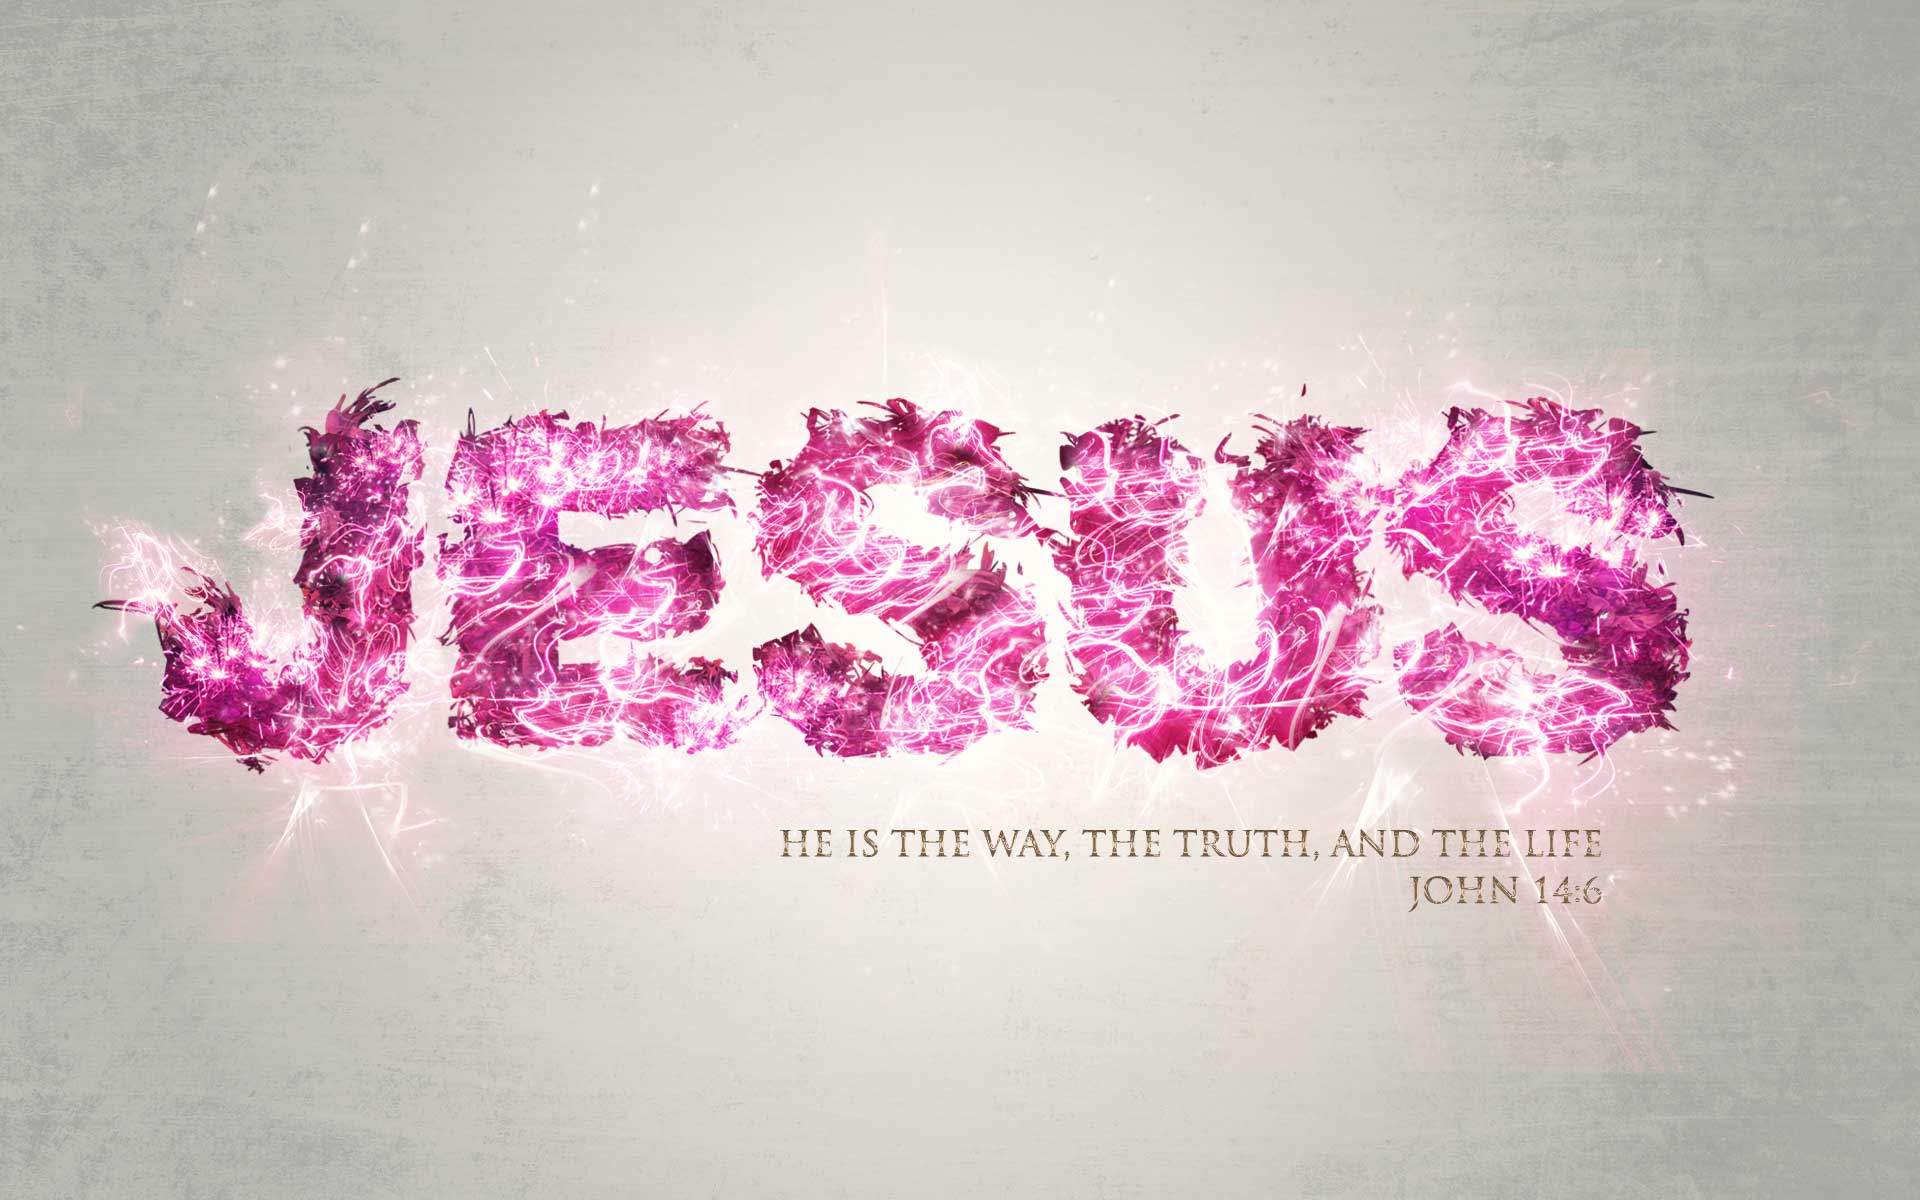 Jesus,the way,the truth,and the life - John 14:6 HD ...